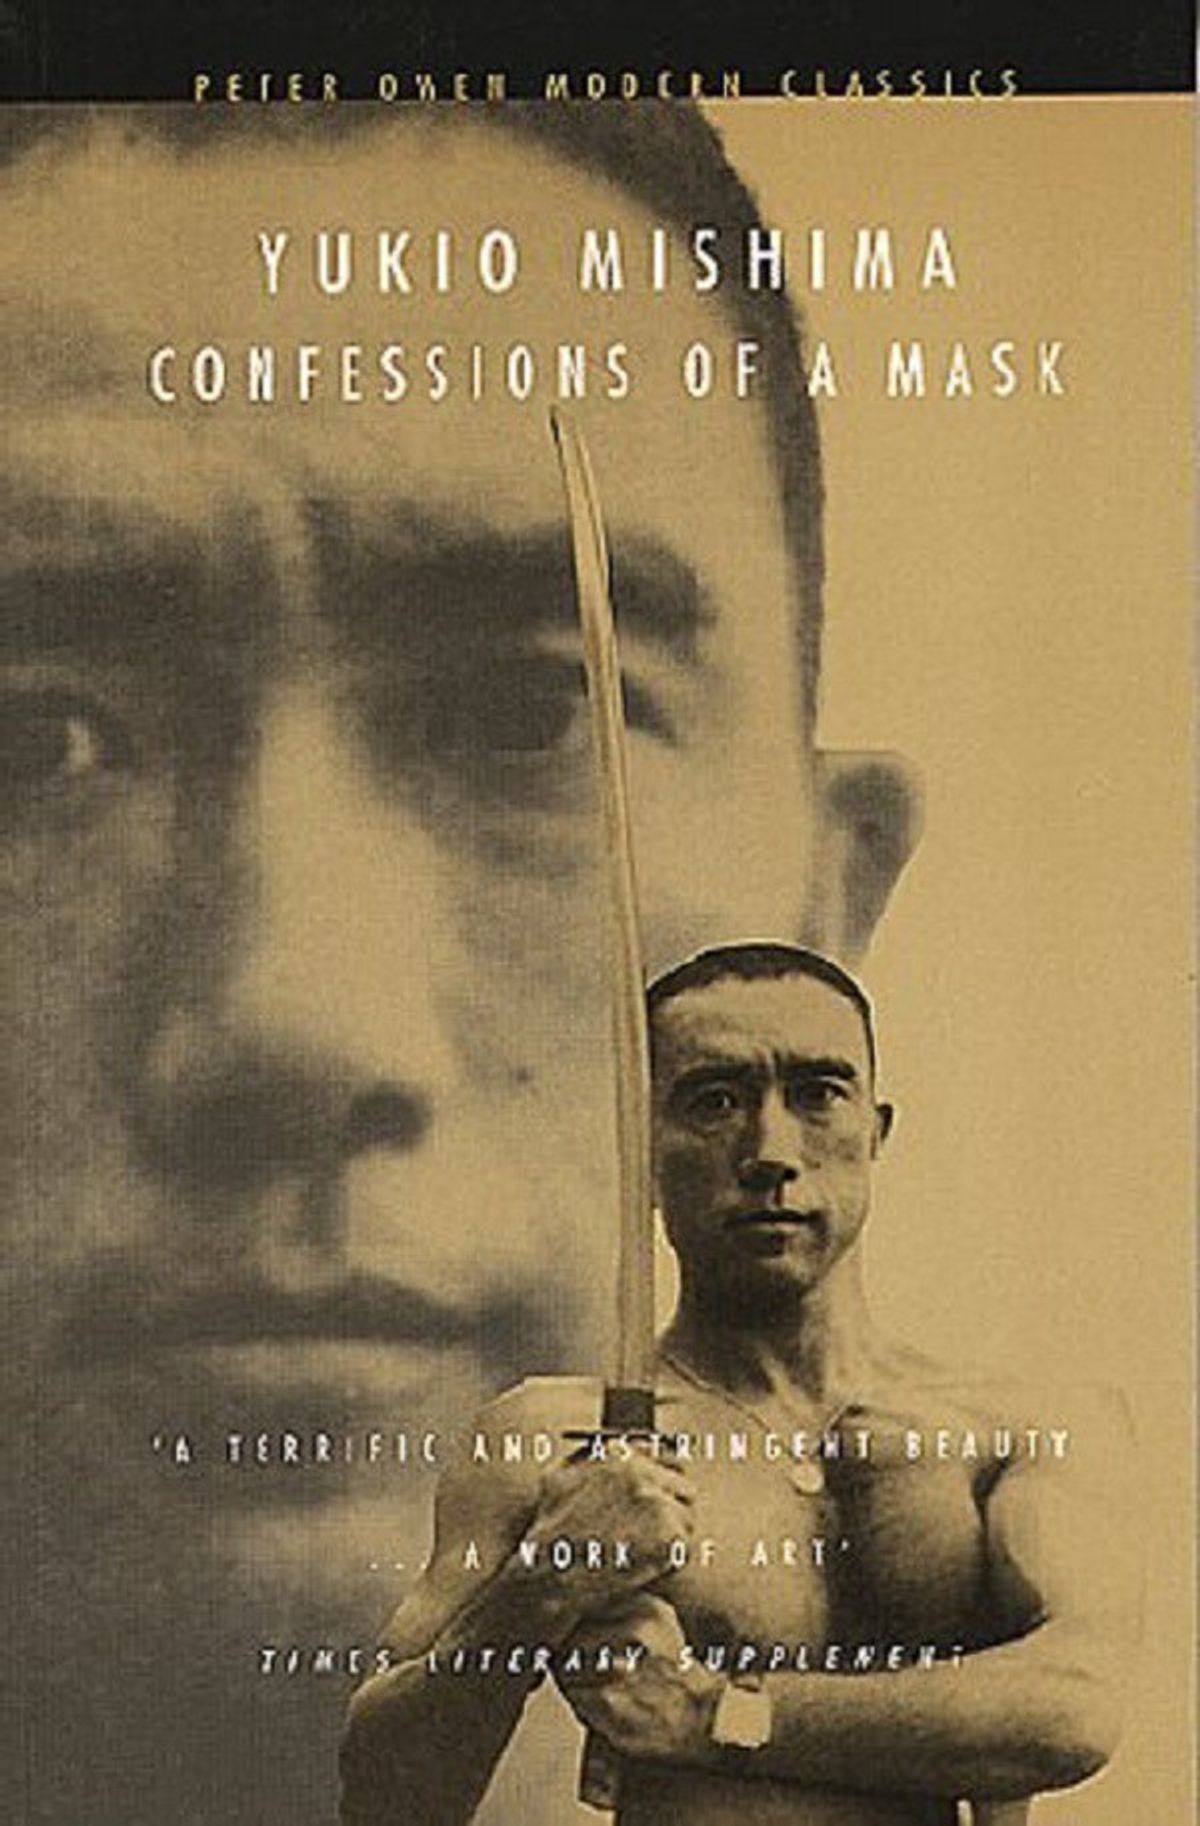 A Review Of "Confessions Of A Mask" And Sexuality